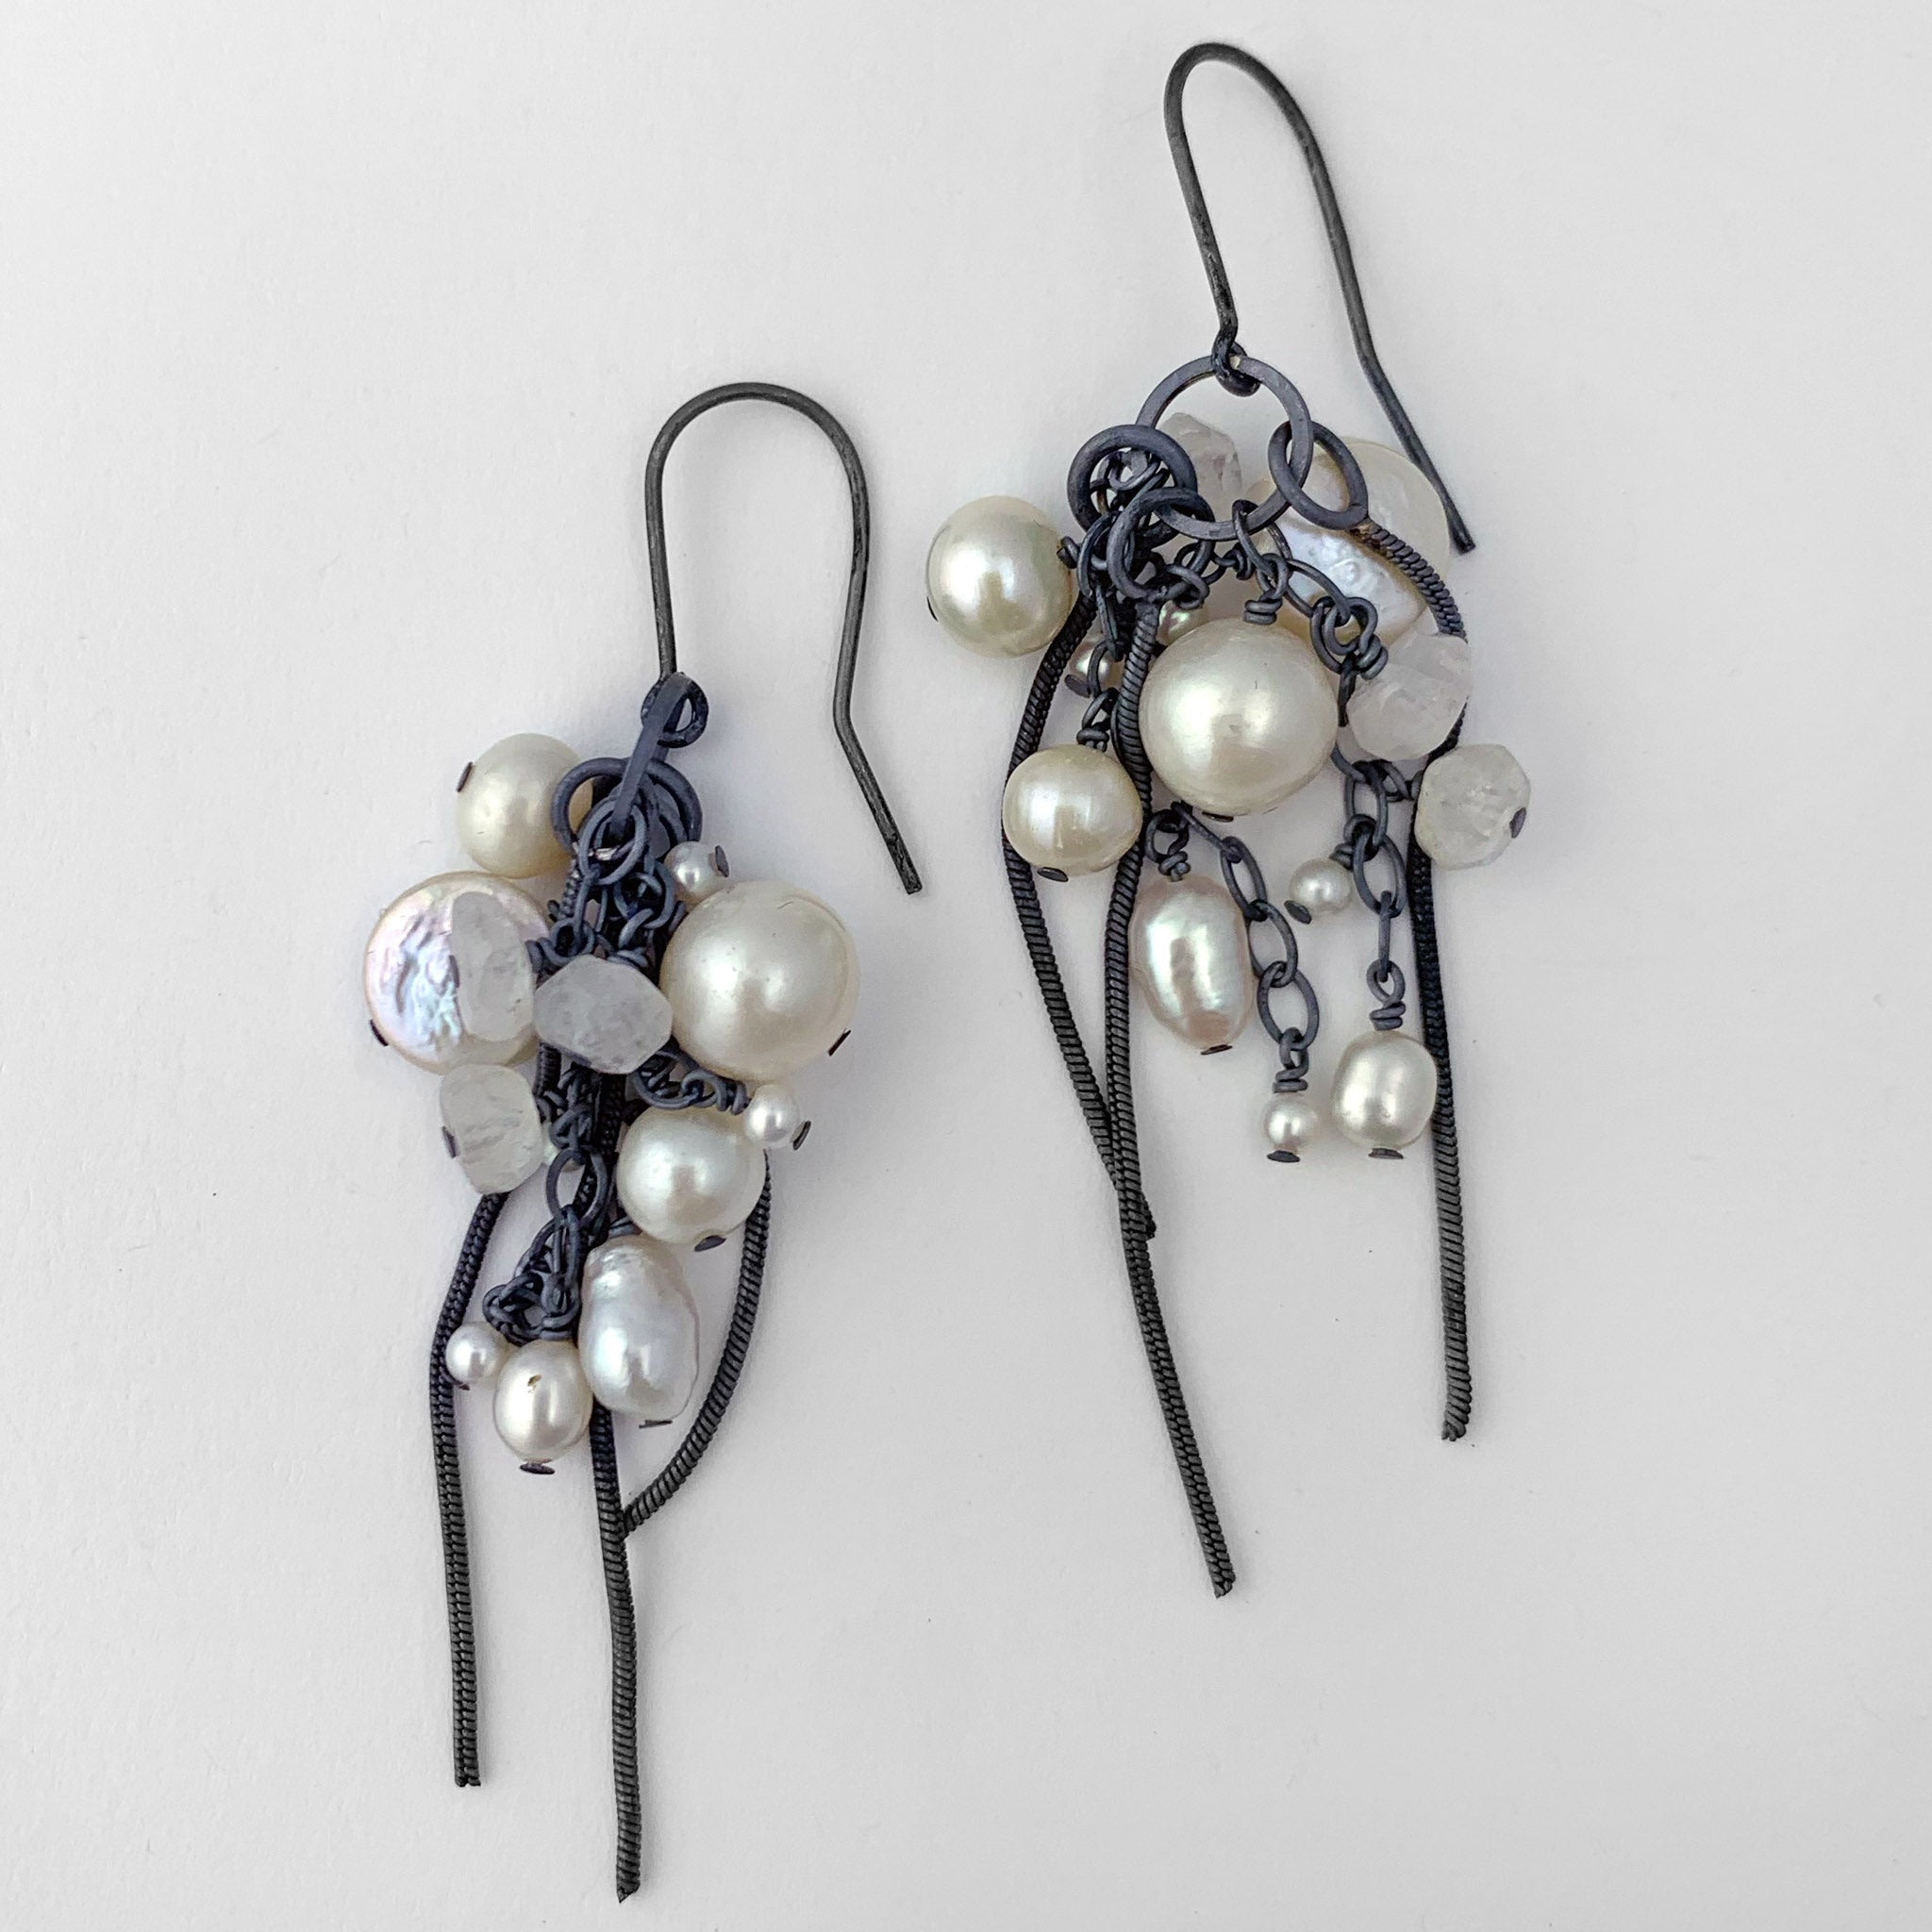 Cluster earrings with pearls and rainbow moonstone